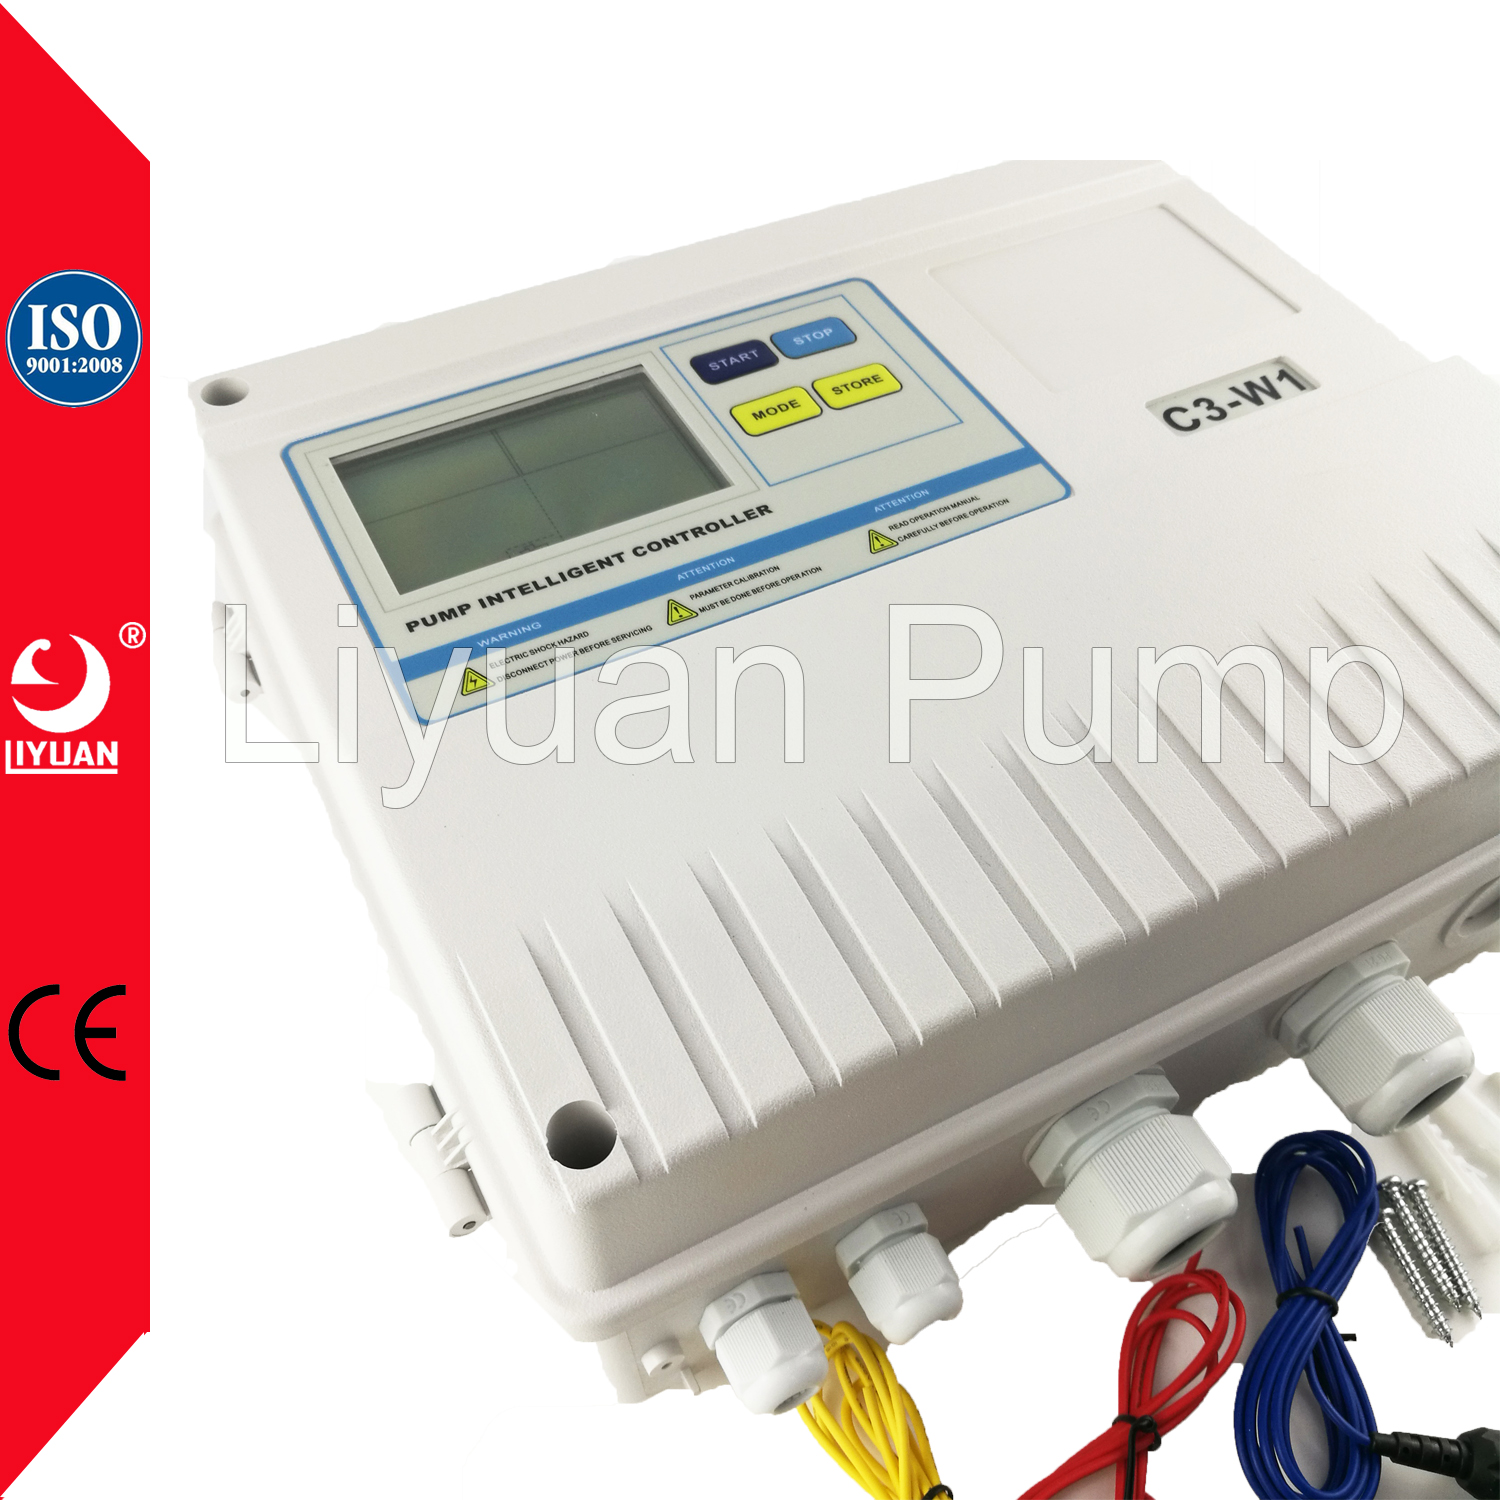 MPPT Charge Controller, Solar Pumping System